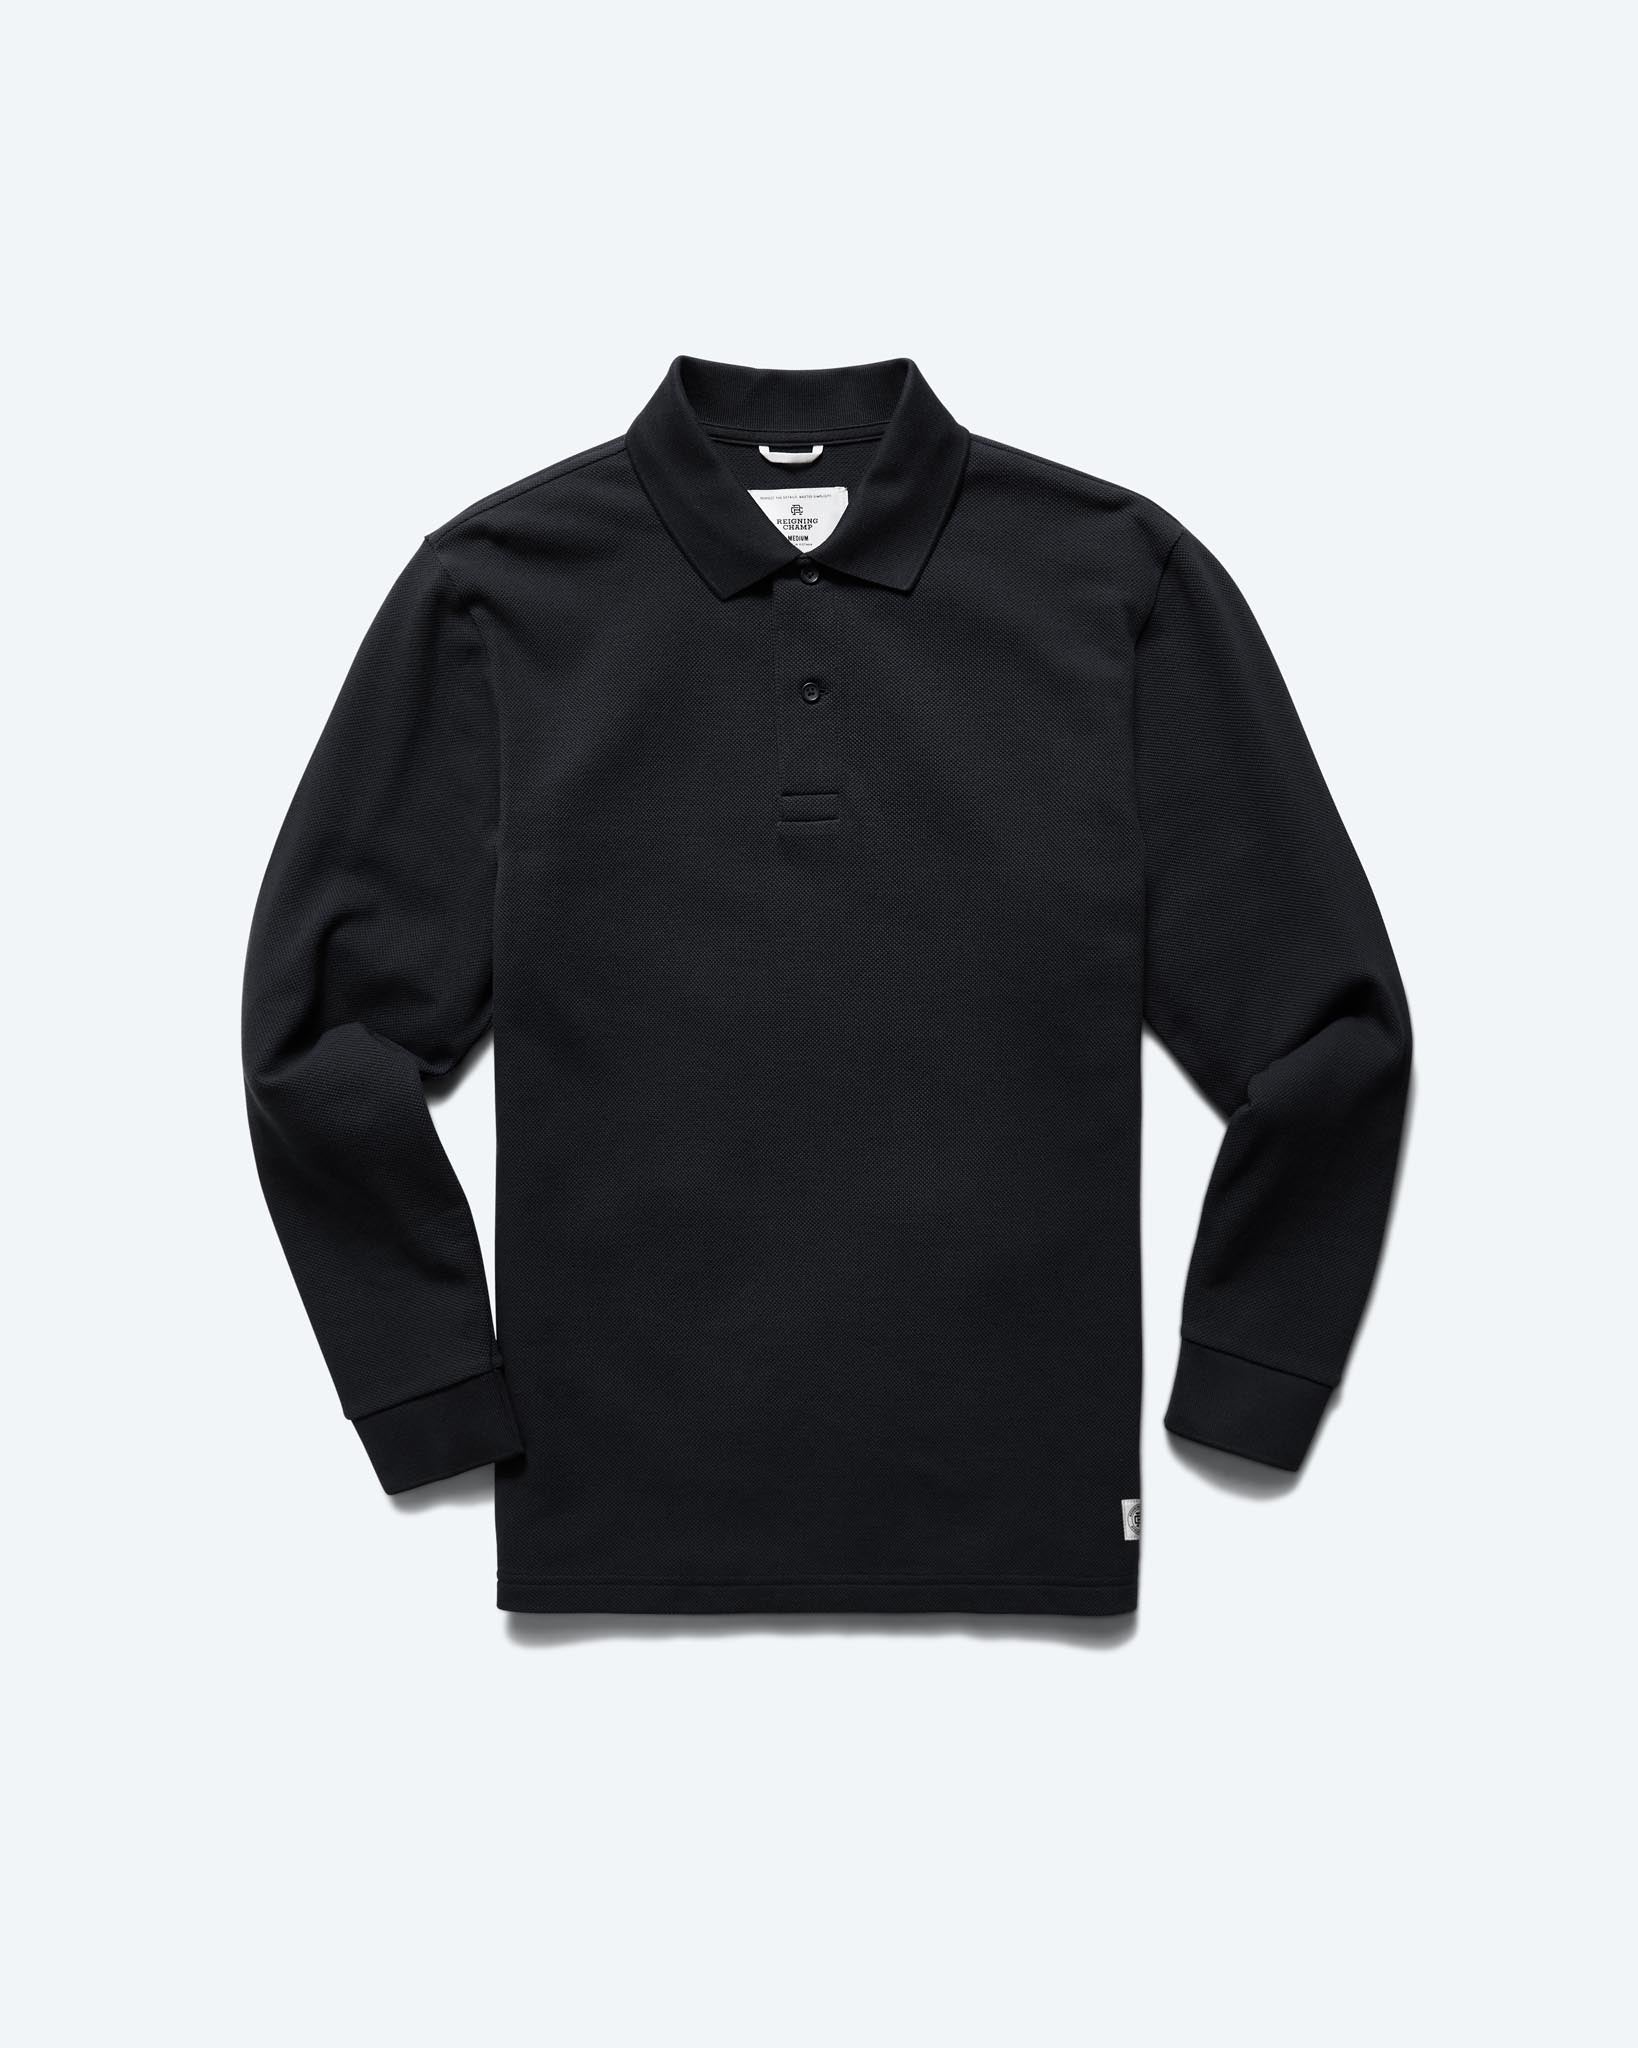 Reigning Champ Athletic Pique Academy LS Polo in Black